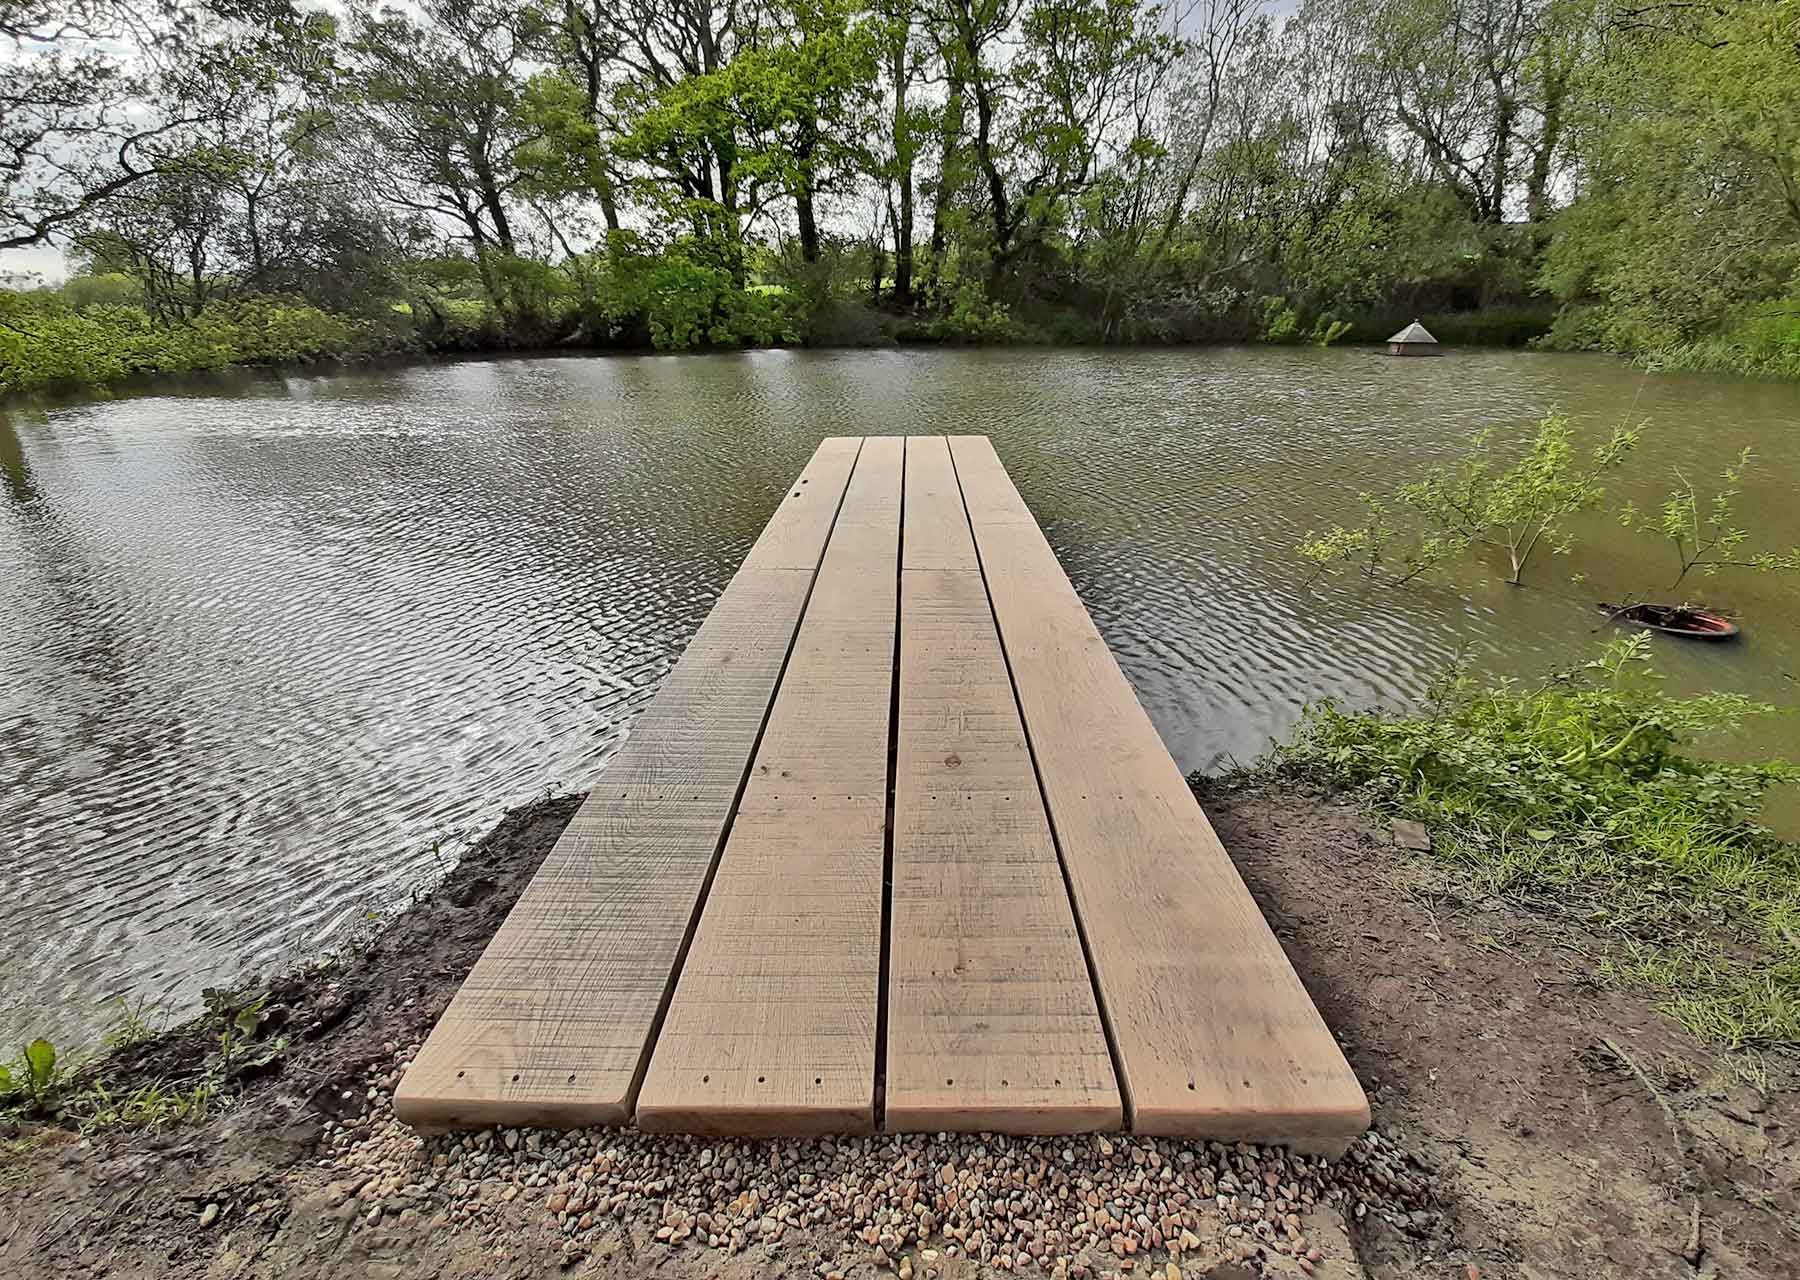 Waterlands build, restore and repair lakes, ponds and water features: Pontoon.